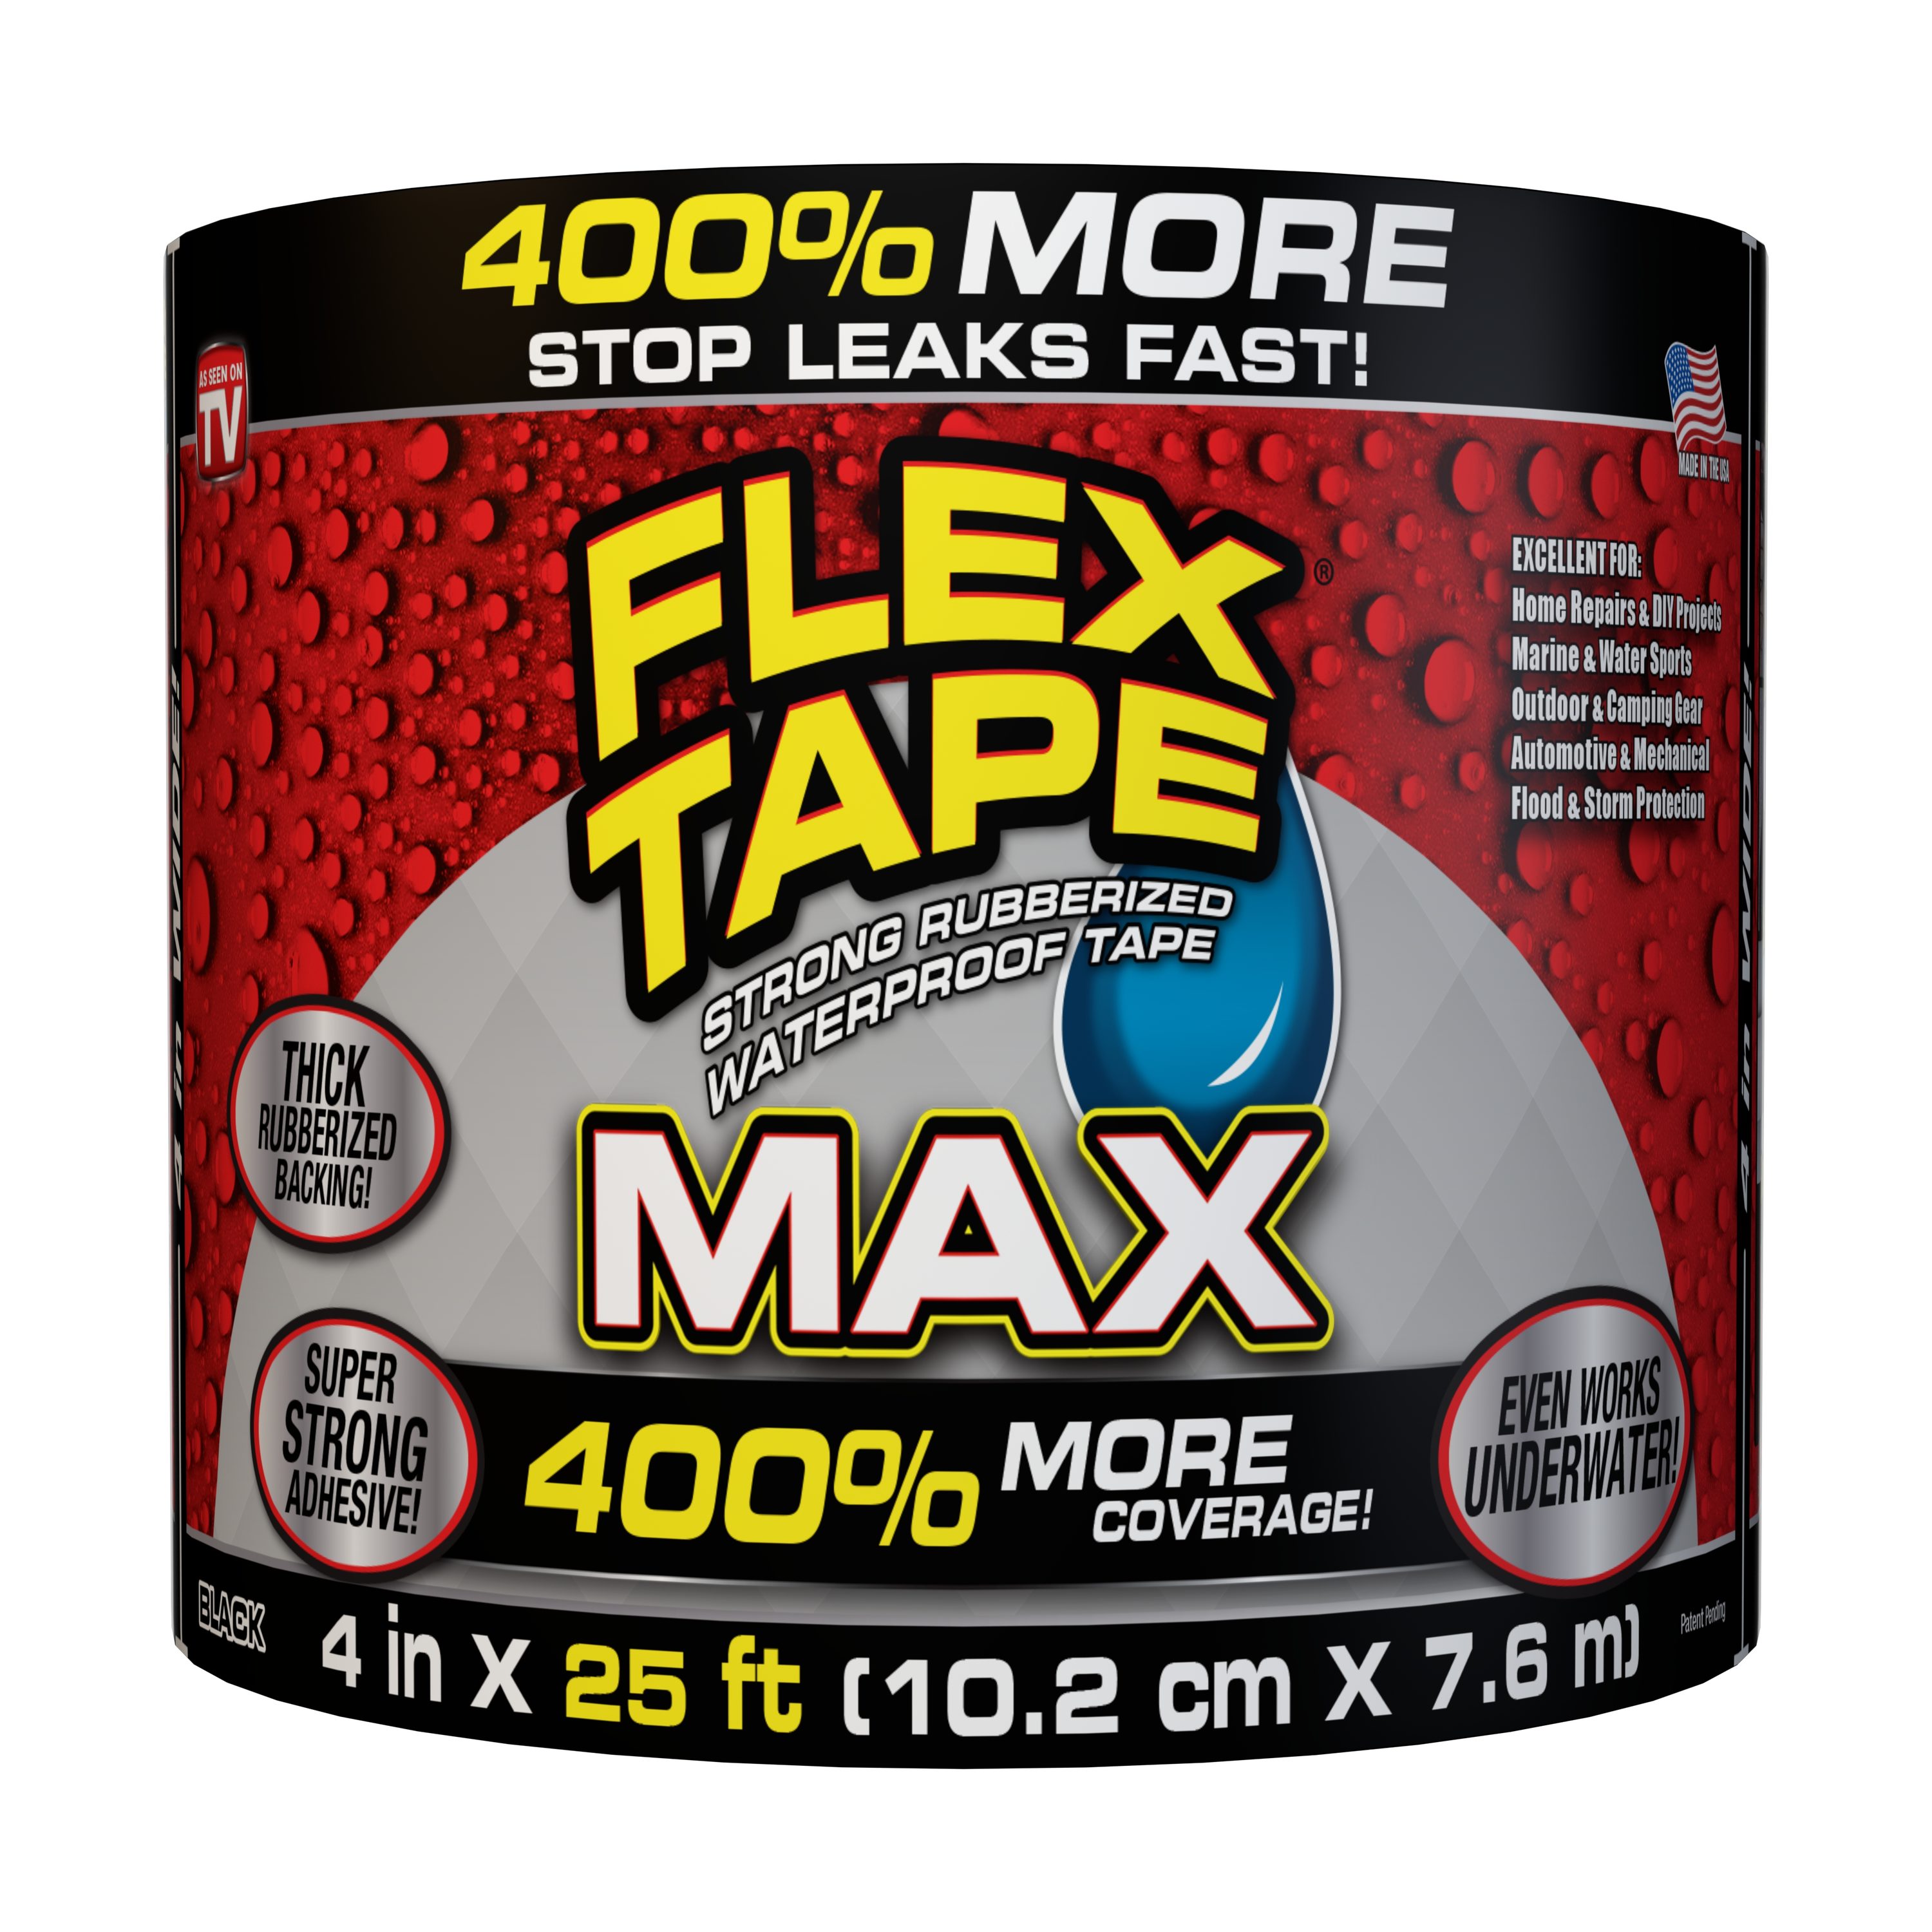 Flex Tape, 4 in x 5 ft, Clear, Original Thick Flexible Rubberized  Waterproof Tape - Seal and Patch Leaks, Works Underwater, Indoor Outdoor  Projects 